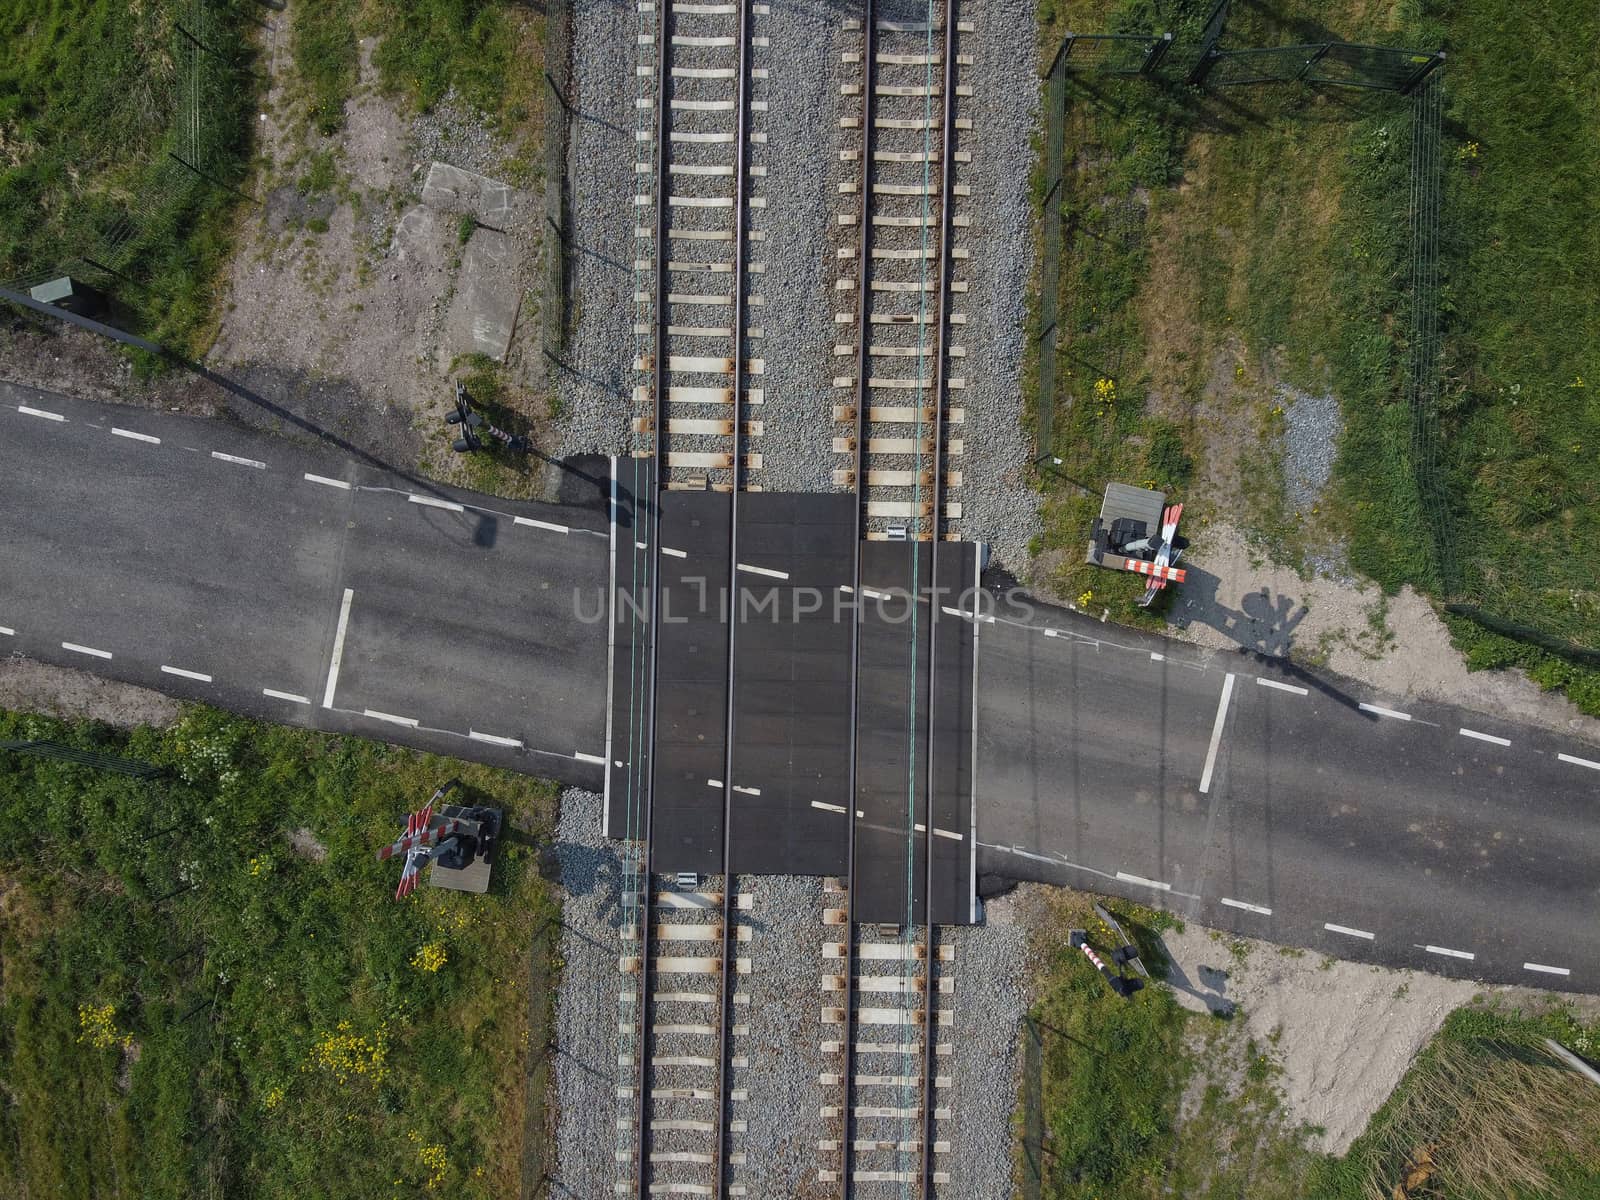 Railroad crossing and Train Tracks from Above. Aerial view